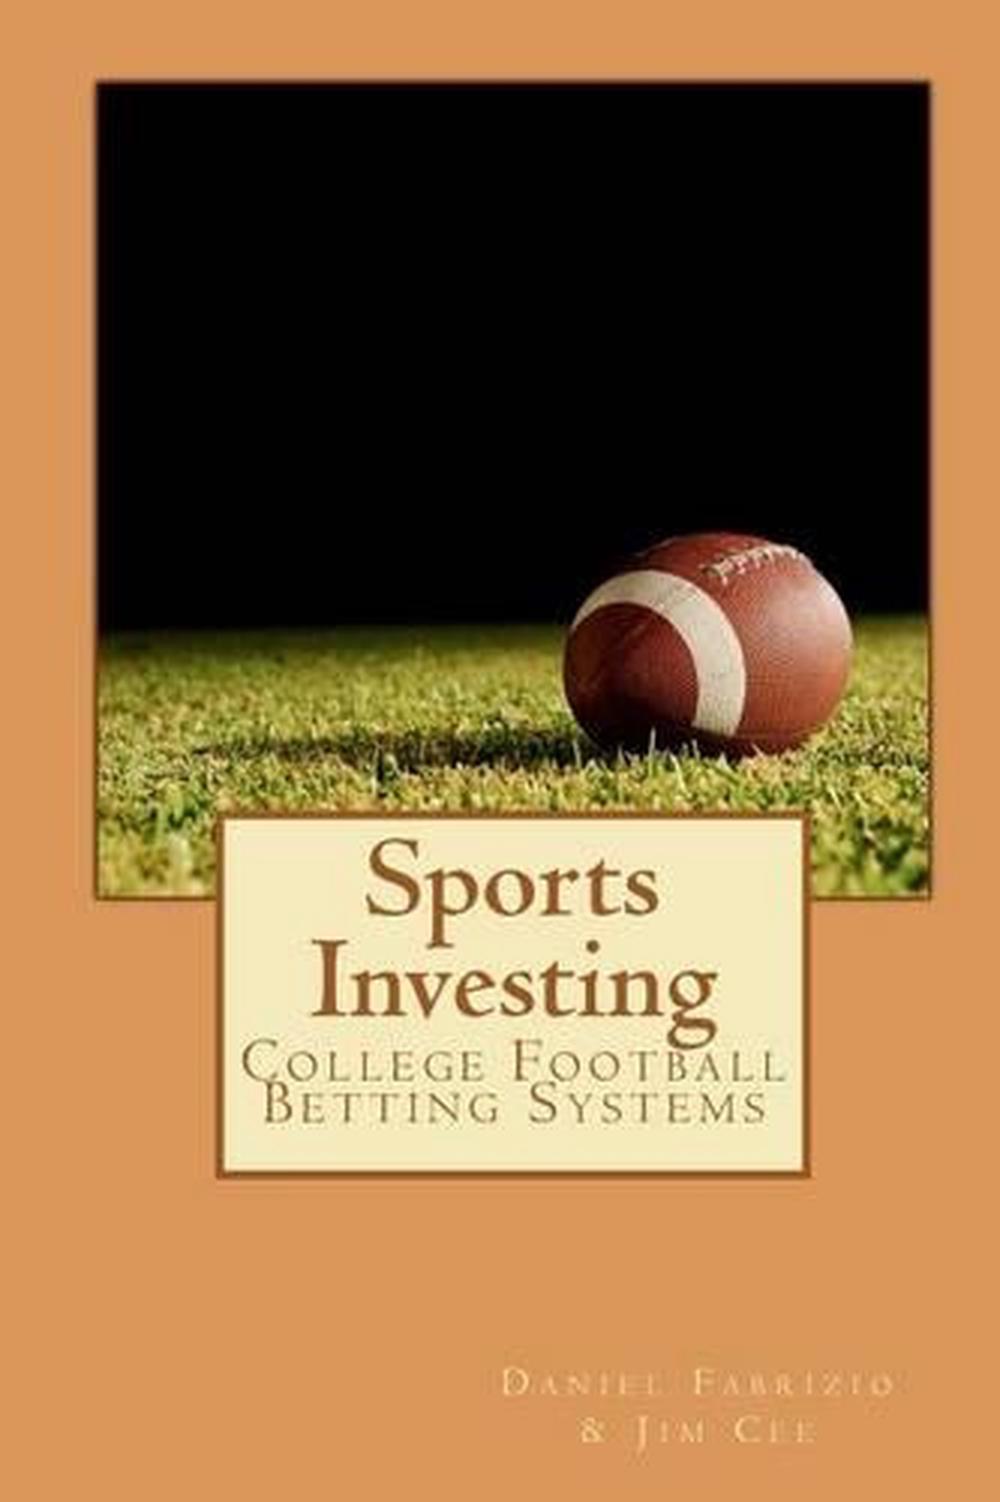 Sports Investing College Football Betting Systems by Daniel Fabrizio